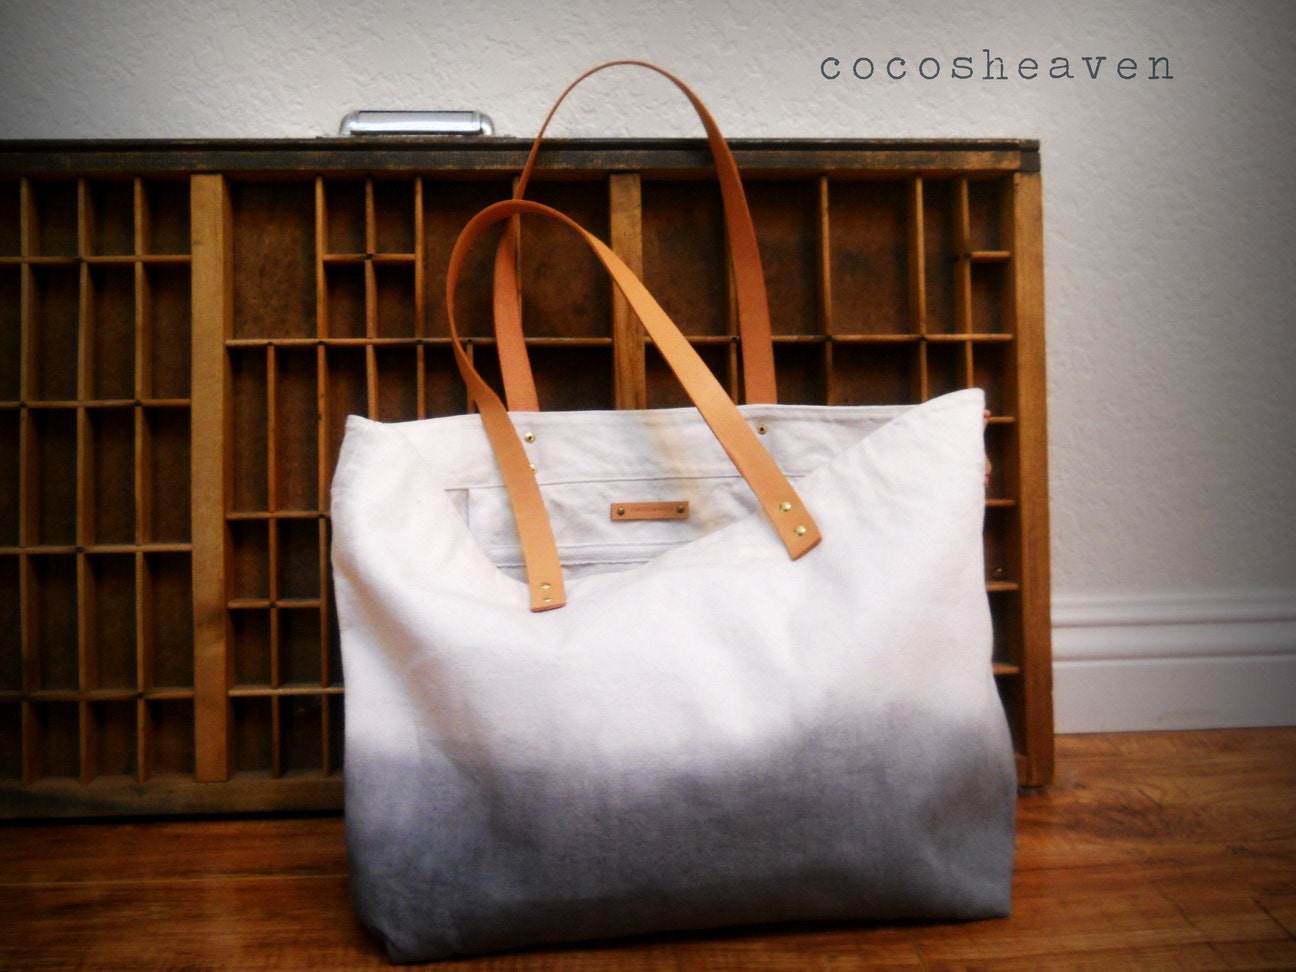 CANVAS TOTE www.paulmartinsmith.com with leather www.paulmartinsmith.com by cocosheaven